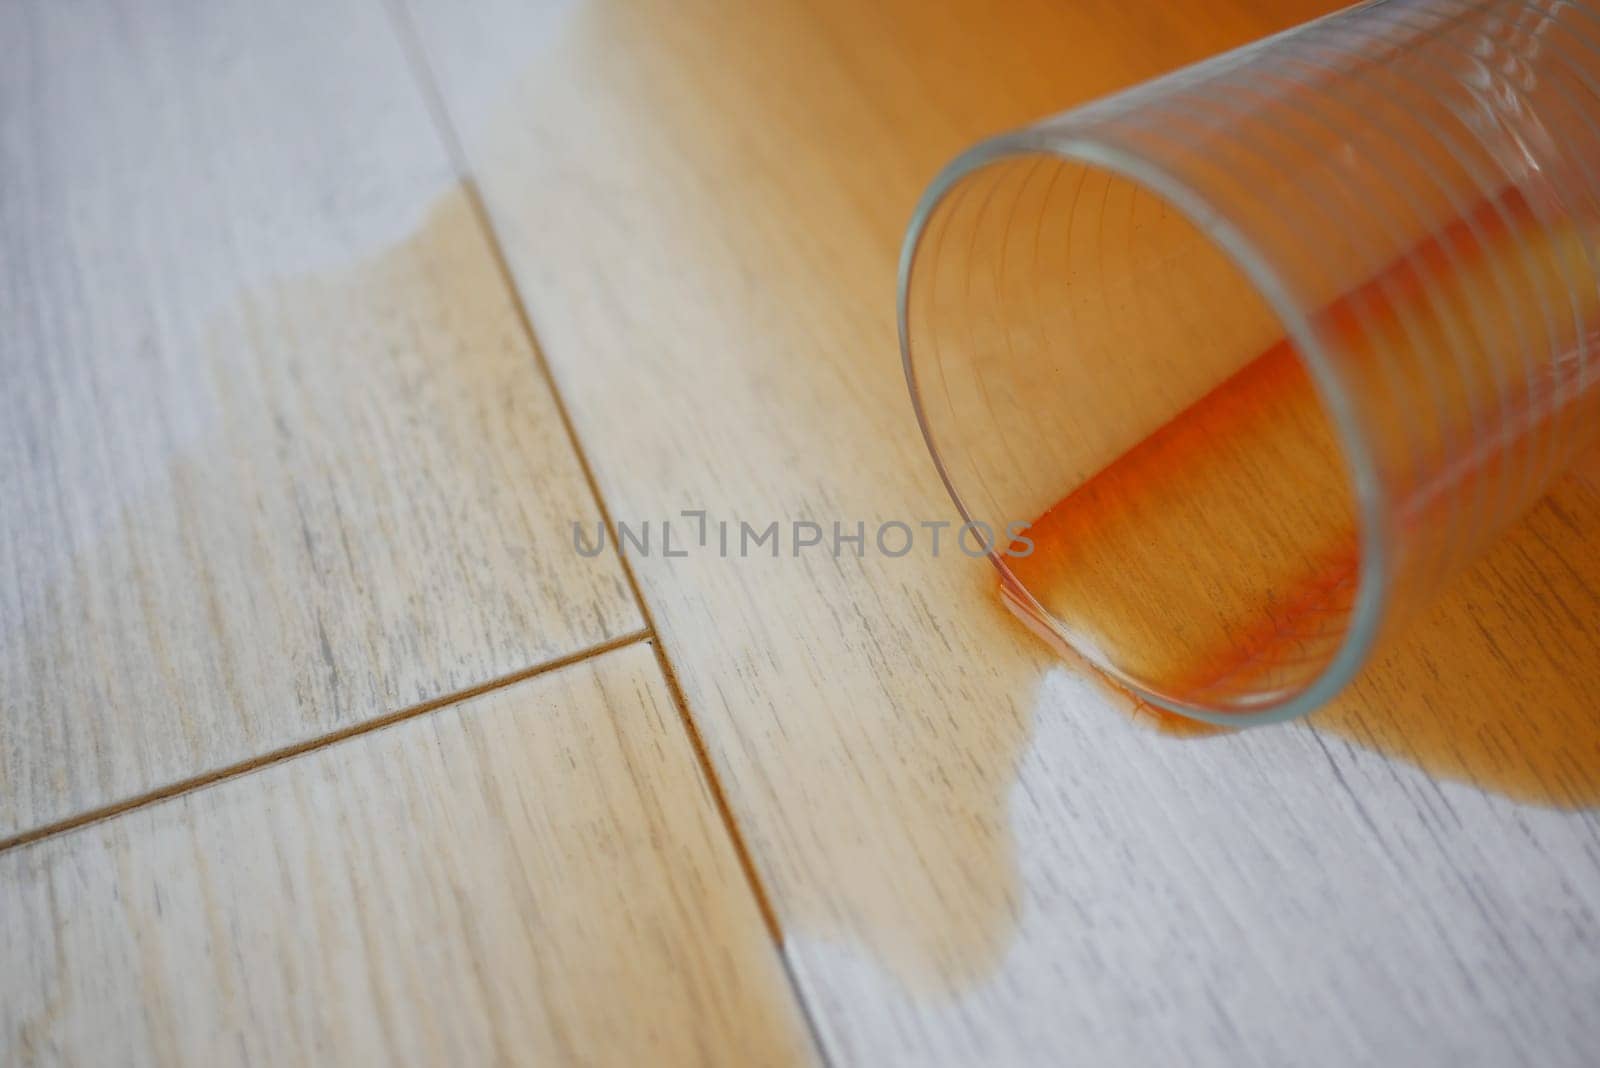 cup of coffee spilled on wooden floor .